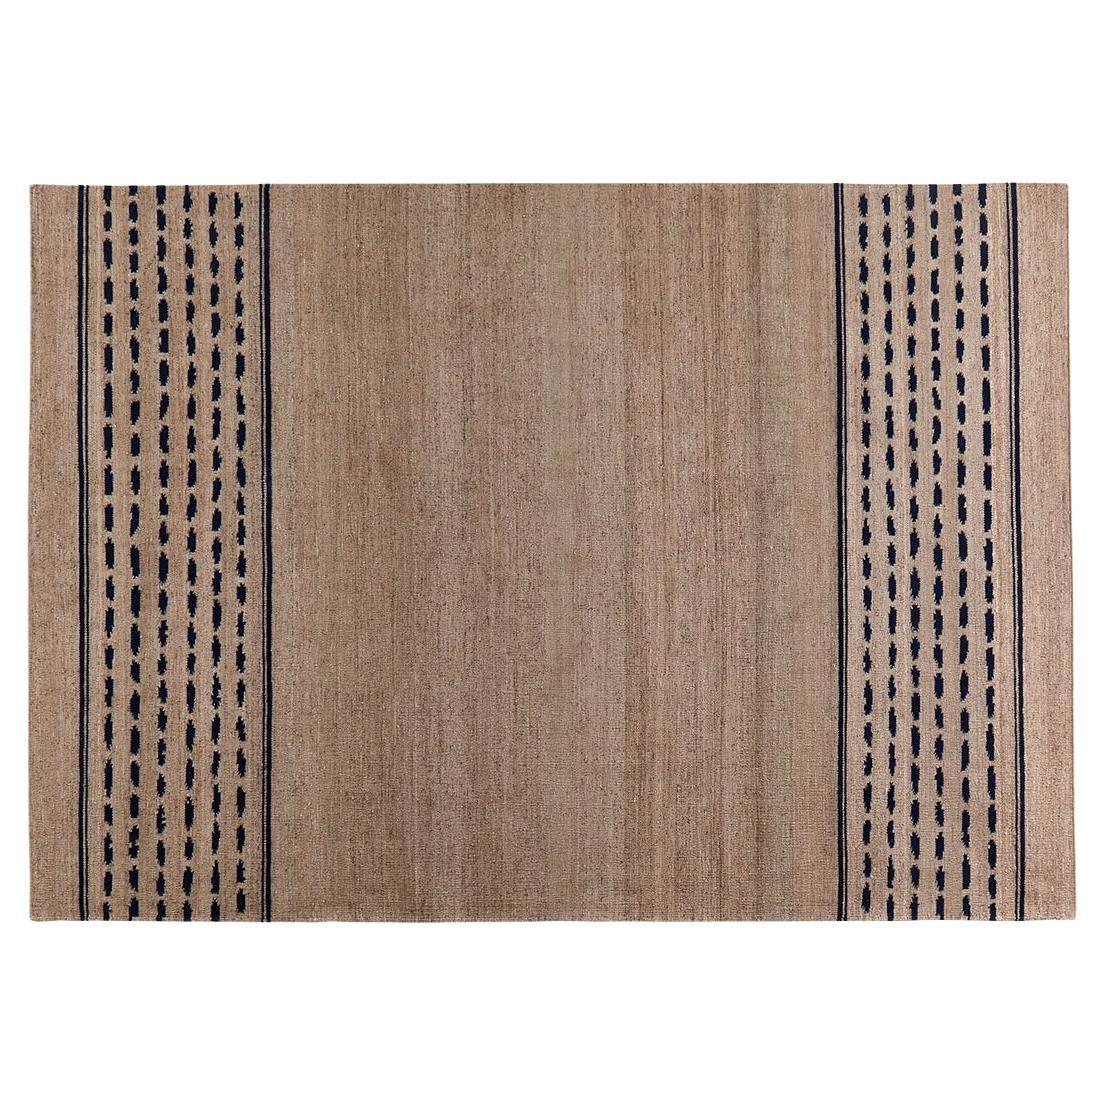 'Dhanu' Rug hand-knotted in sustainable Wool and Allo, 170 x 240 cm For Sale